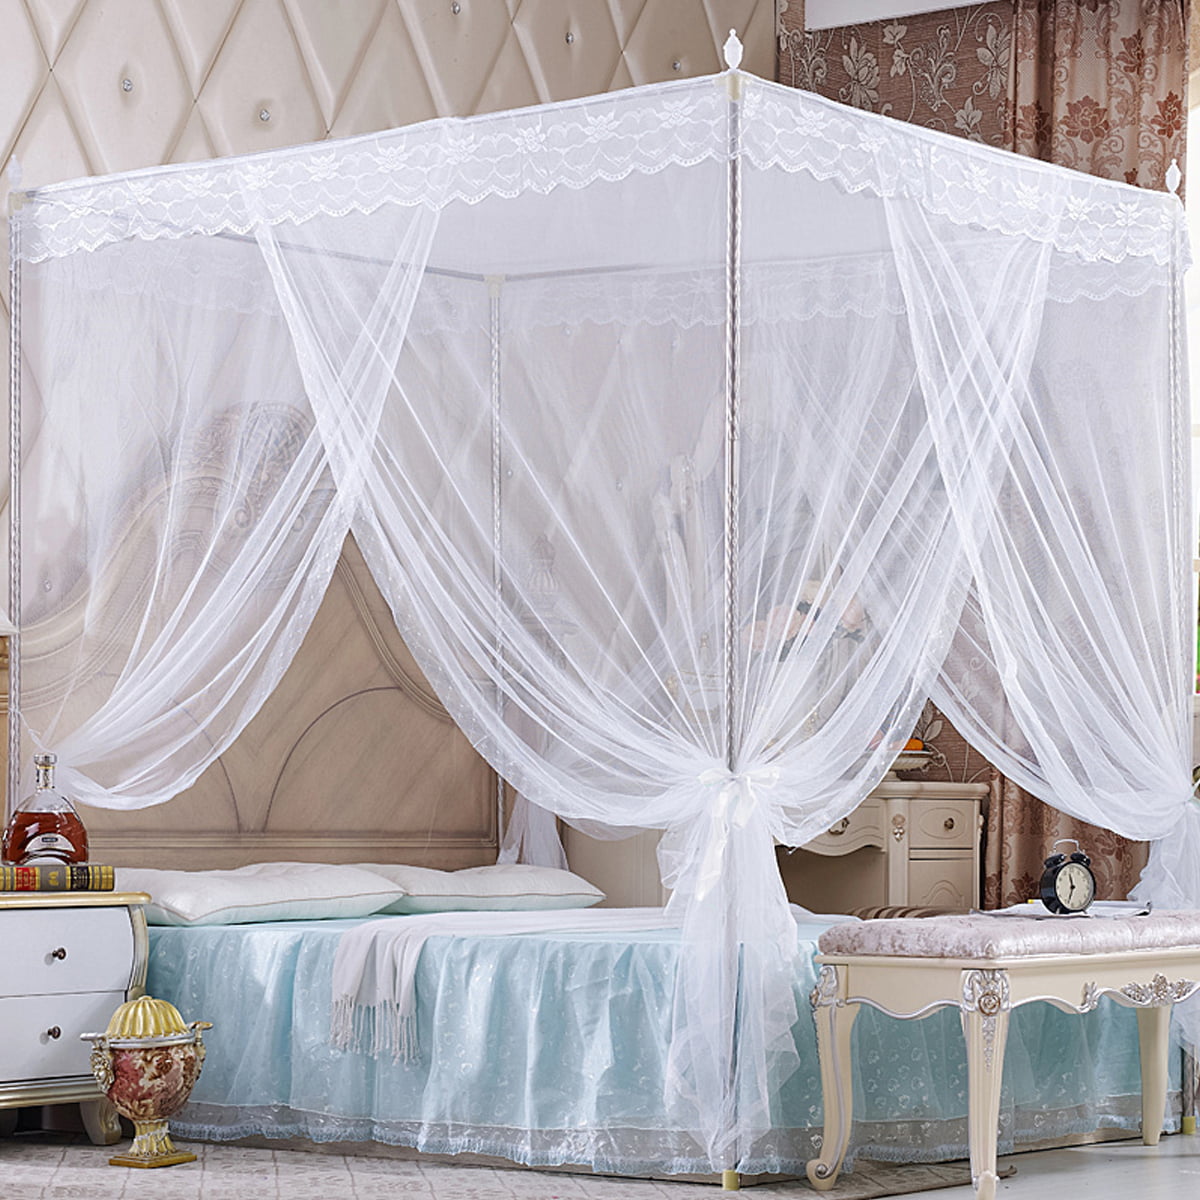 Details about   Mosquito net & frames Luxury princess style mosquito net for summer Romantic bed 